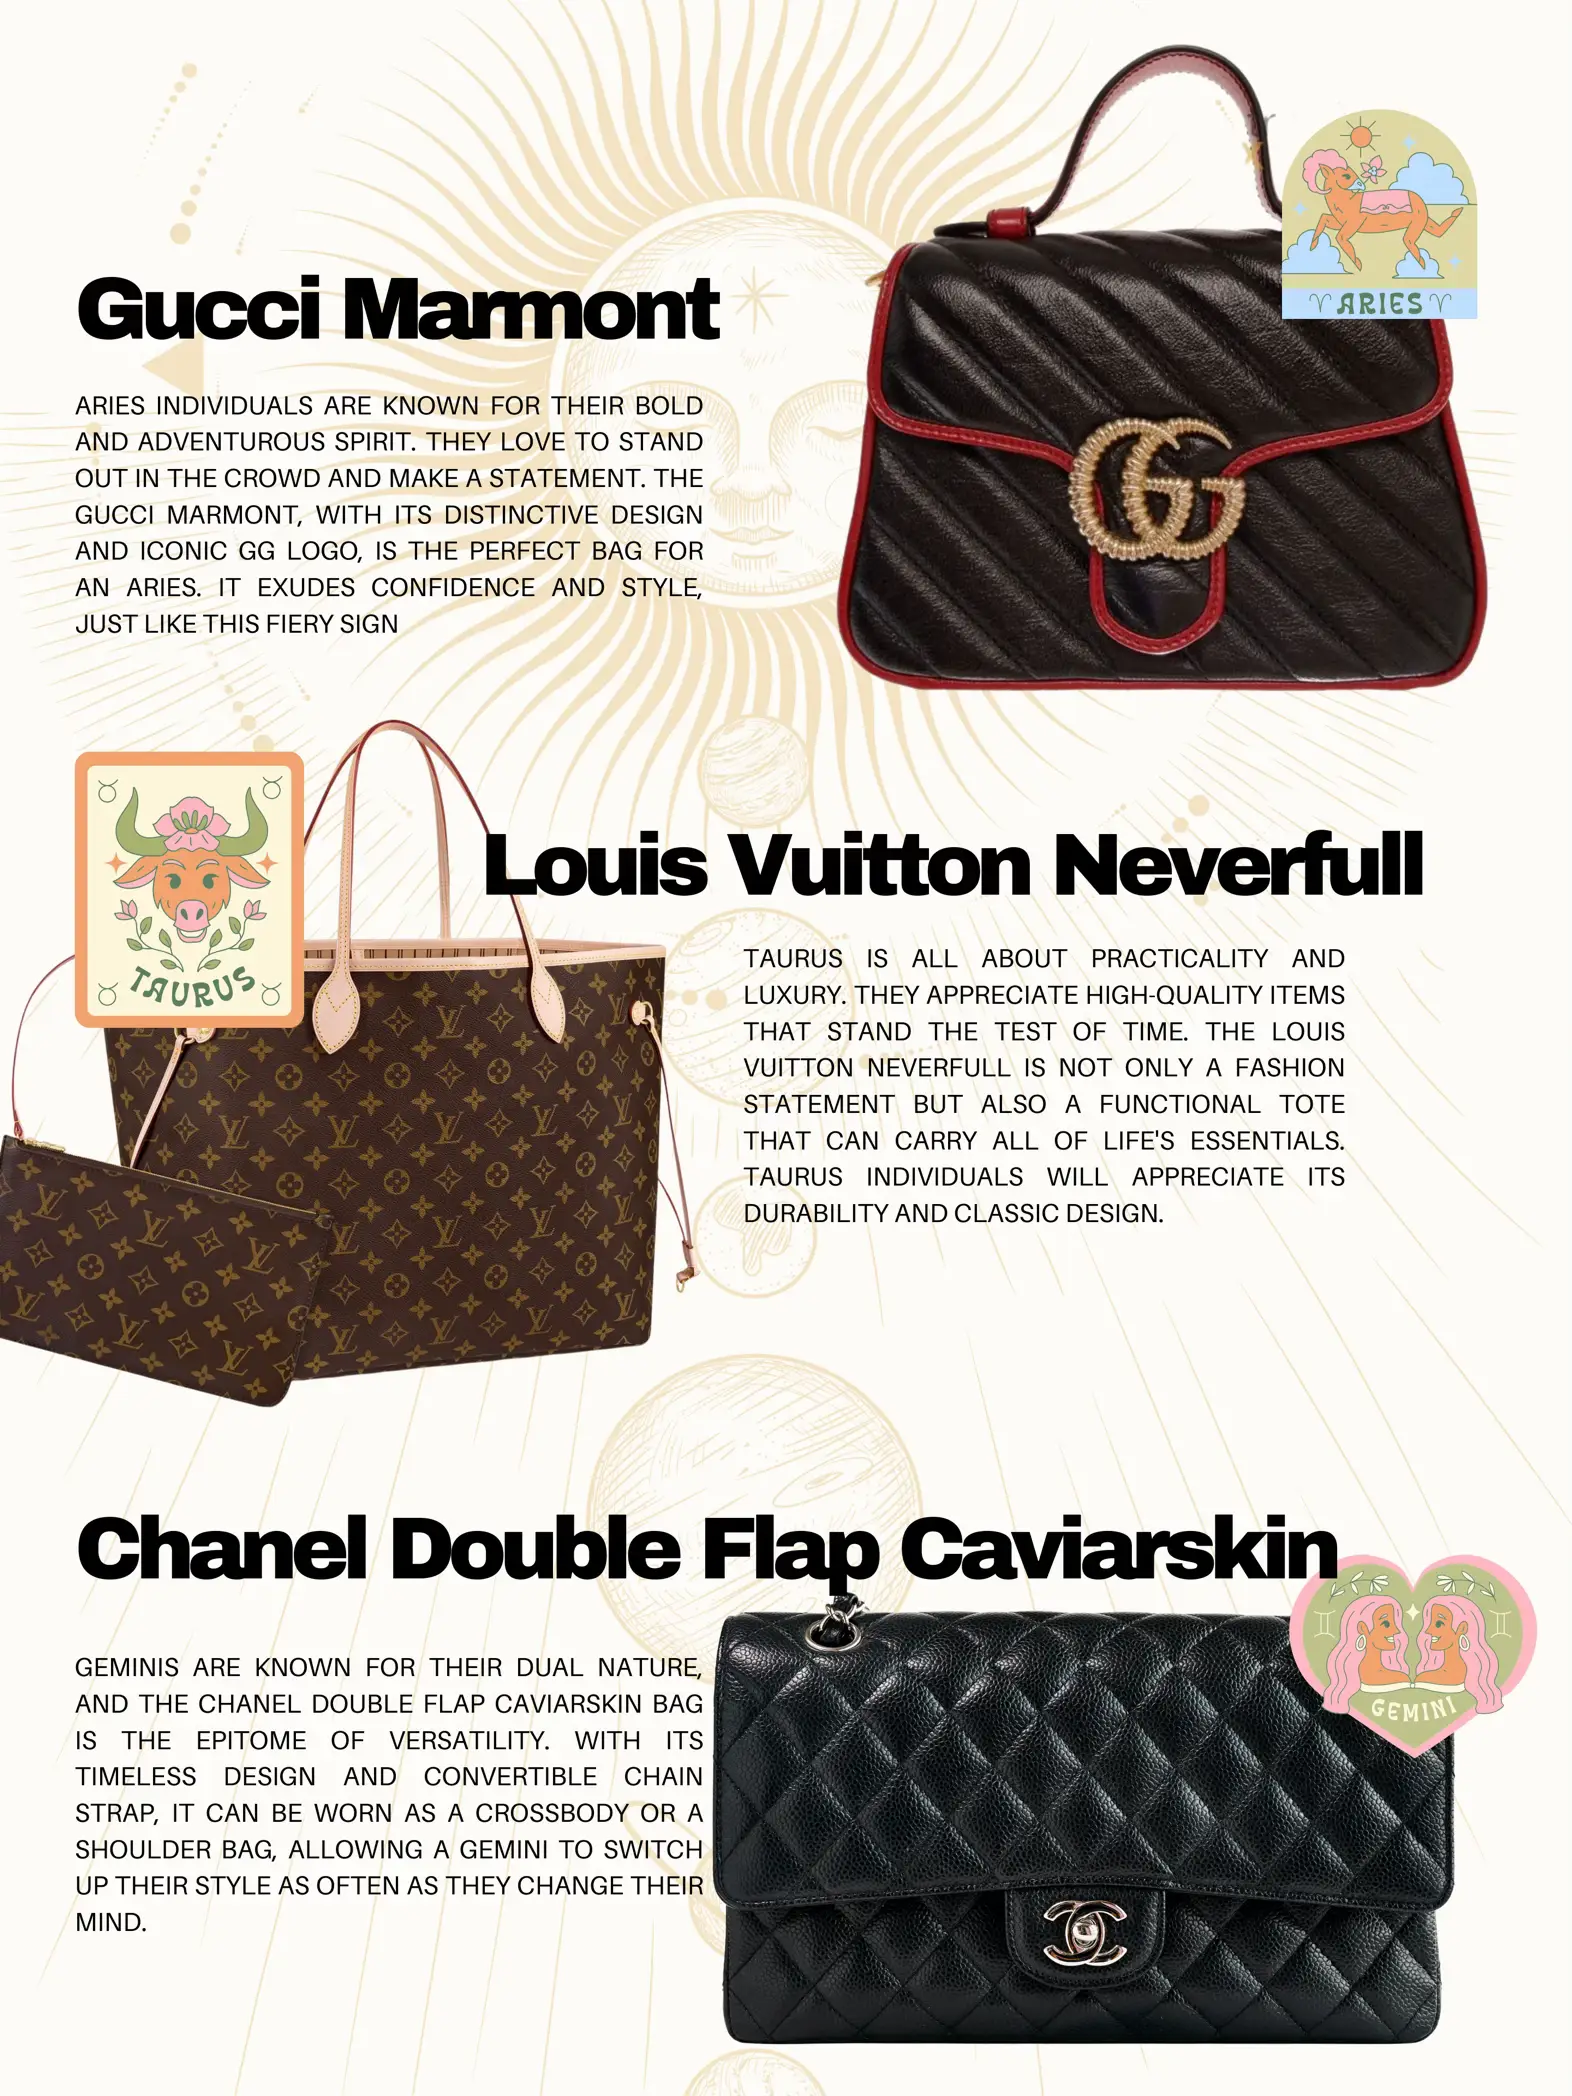 Classic Louis Vuitton bags can not only stand the test of time but